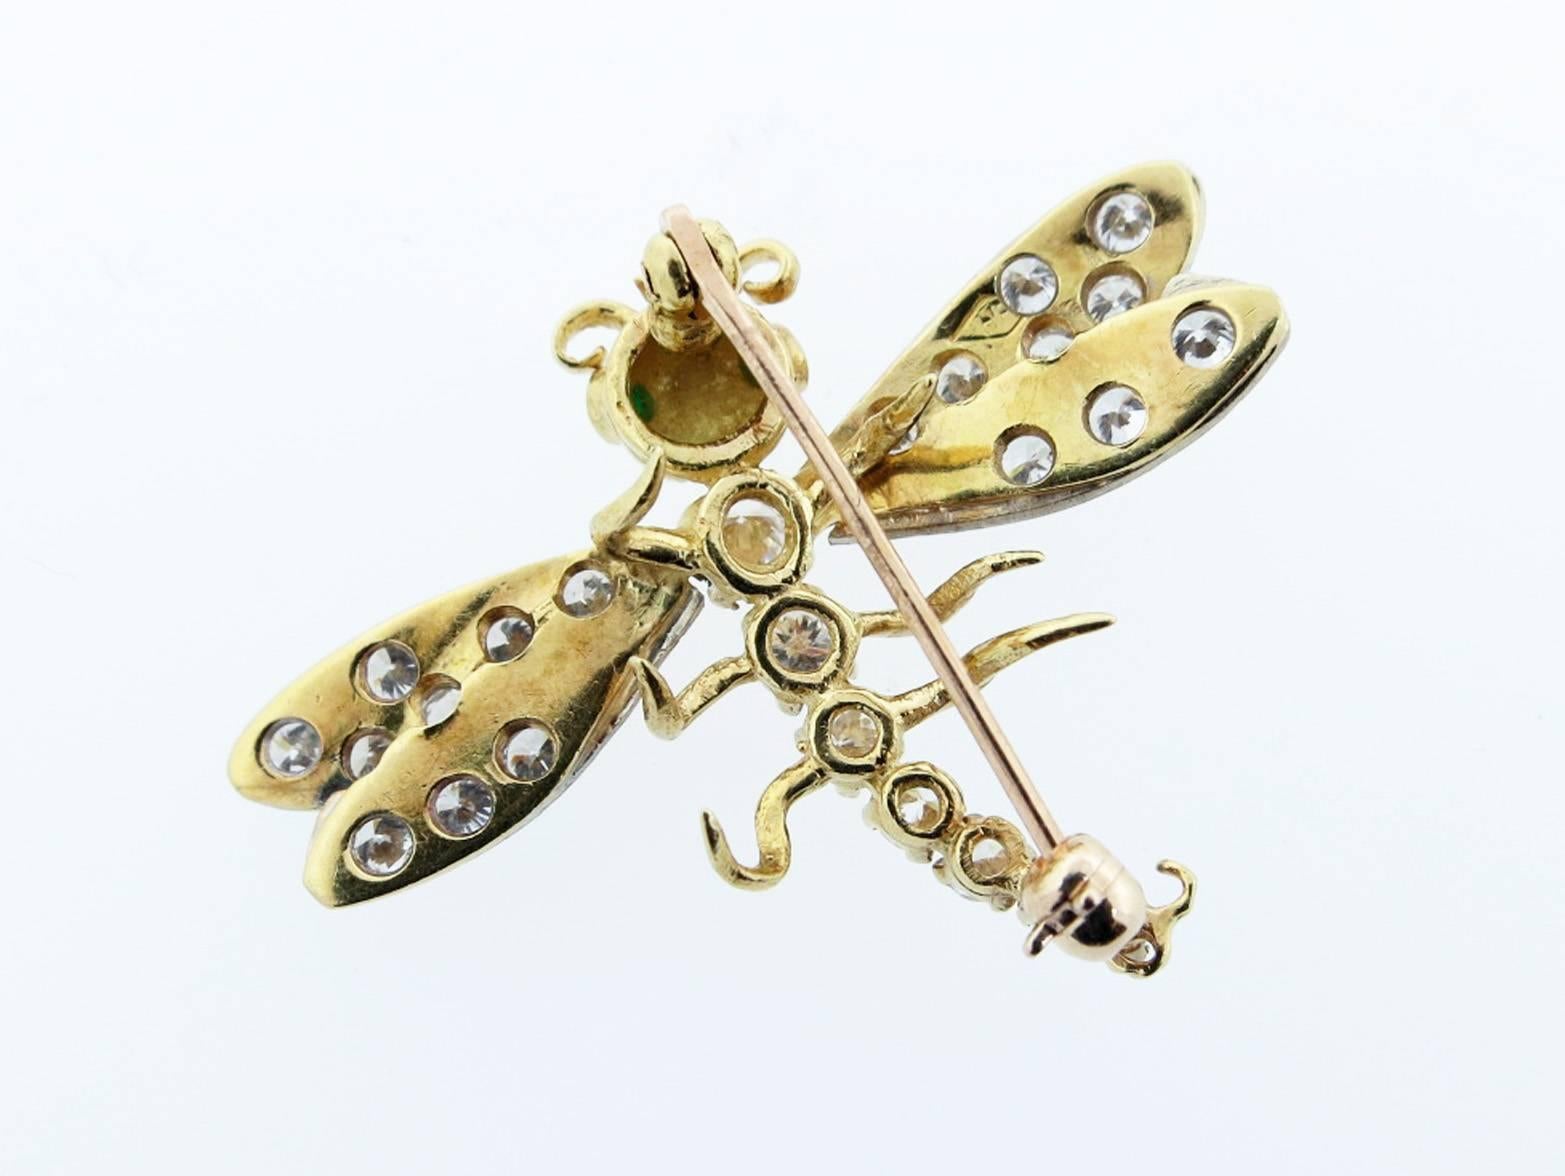 18kt. two color diamond dragonfly brooch.The wings and body are bead with  25 round brilliant cut diamonds totaling approx 1.0cts. grading VS clarity F-G color. Natural faceted emerald eyes.